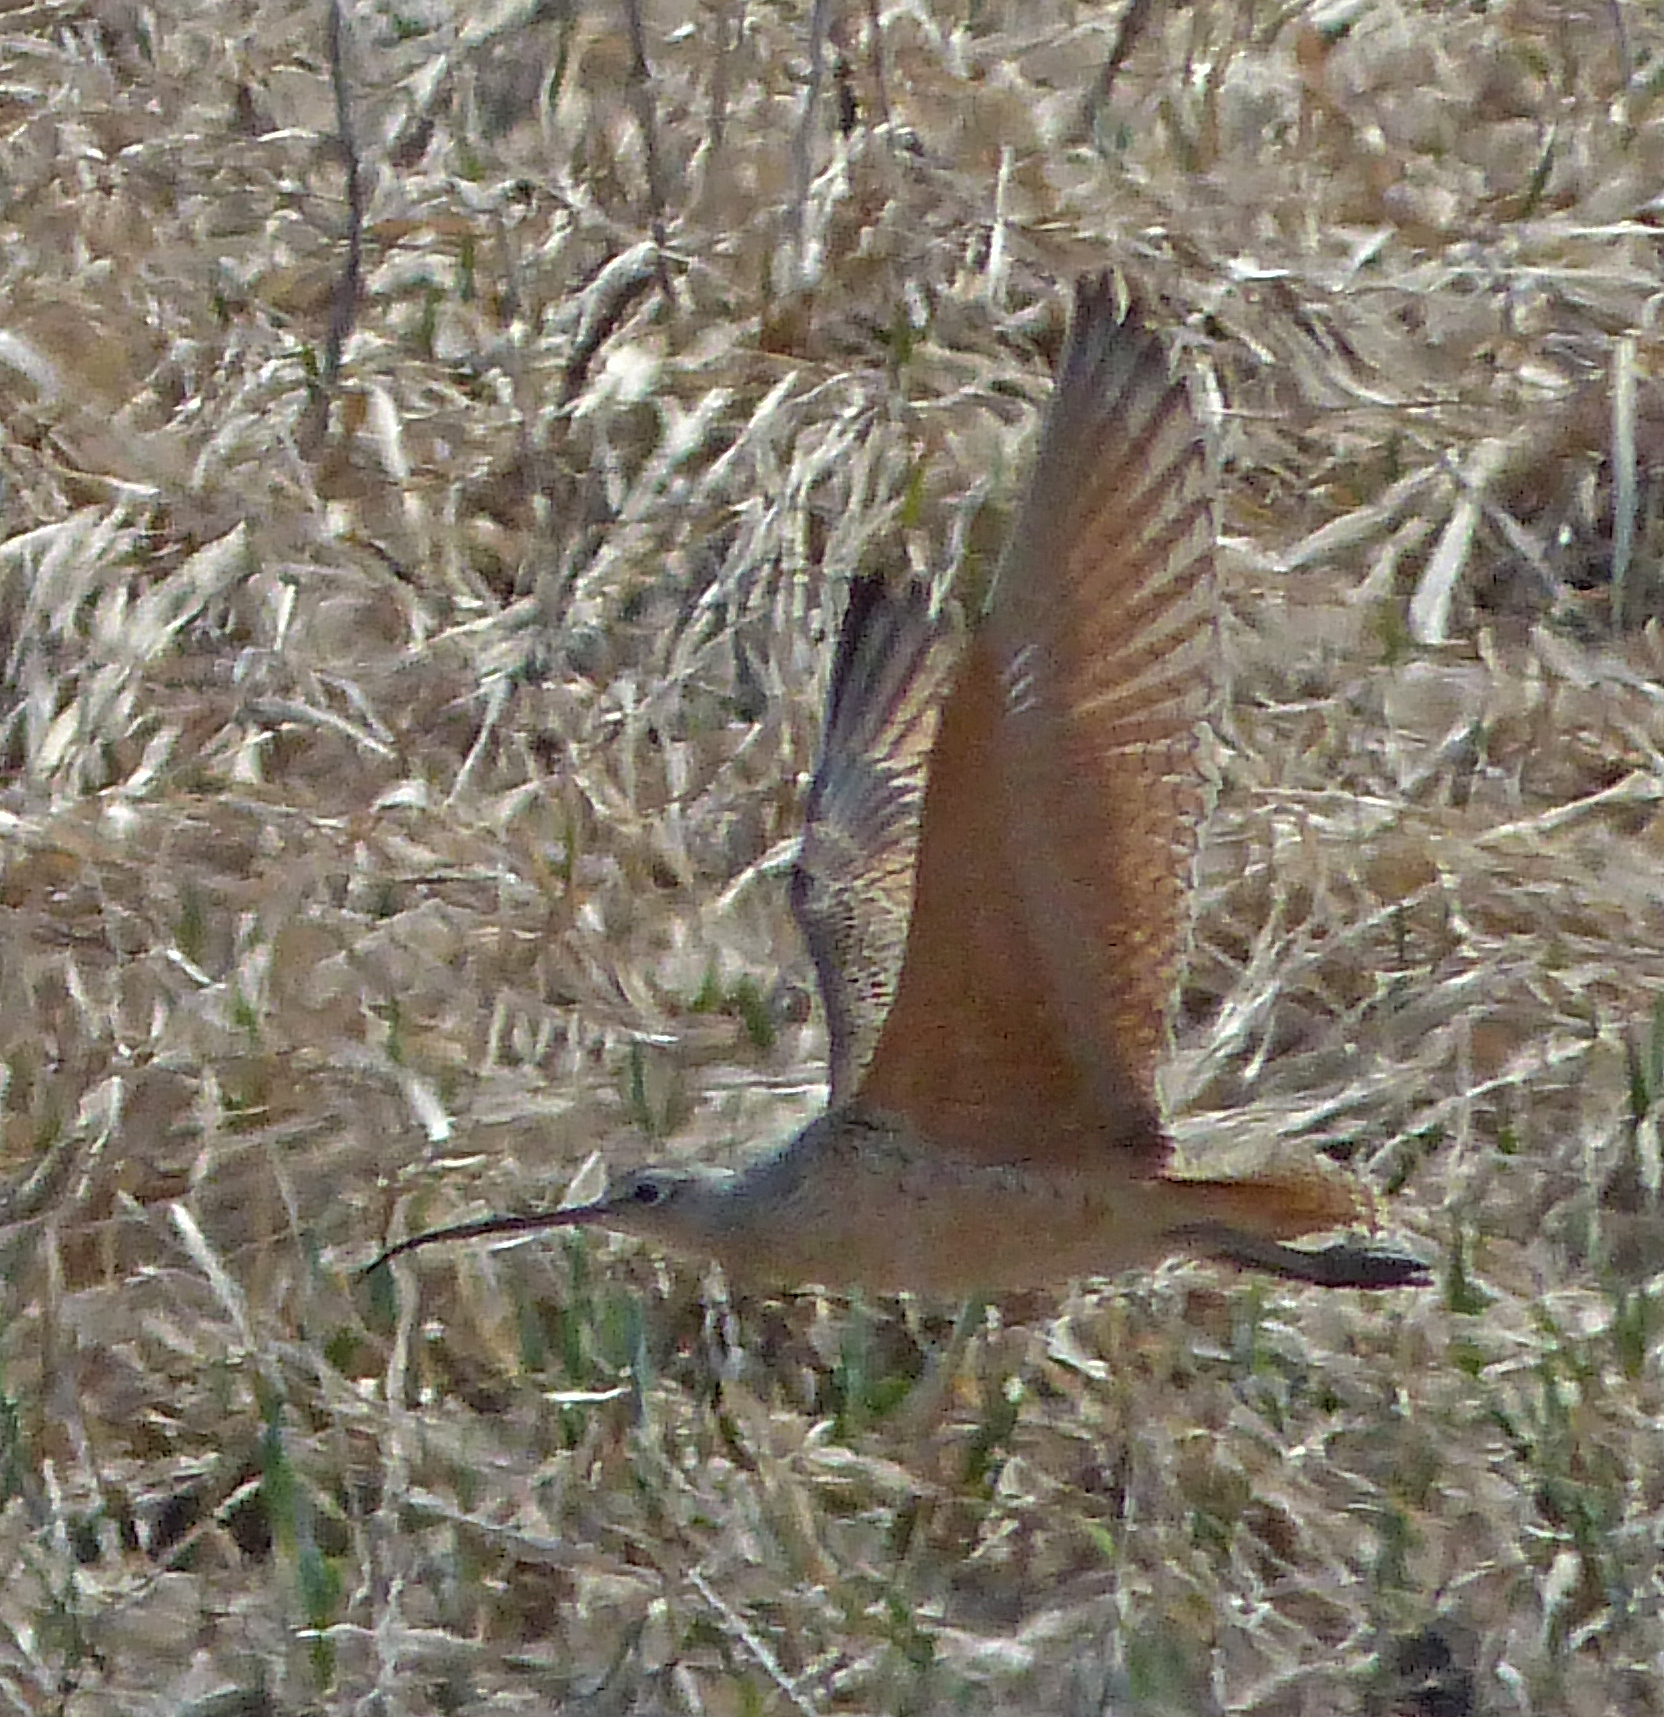 Bob Armstrong captured the Long-bill Curlew in flight. Steve Heinl says the bird is most distinctive this way because its underwings are cinnamon colored. (Photo by Bob Armstrong)